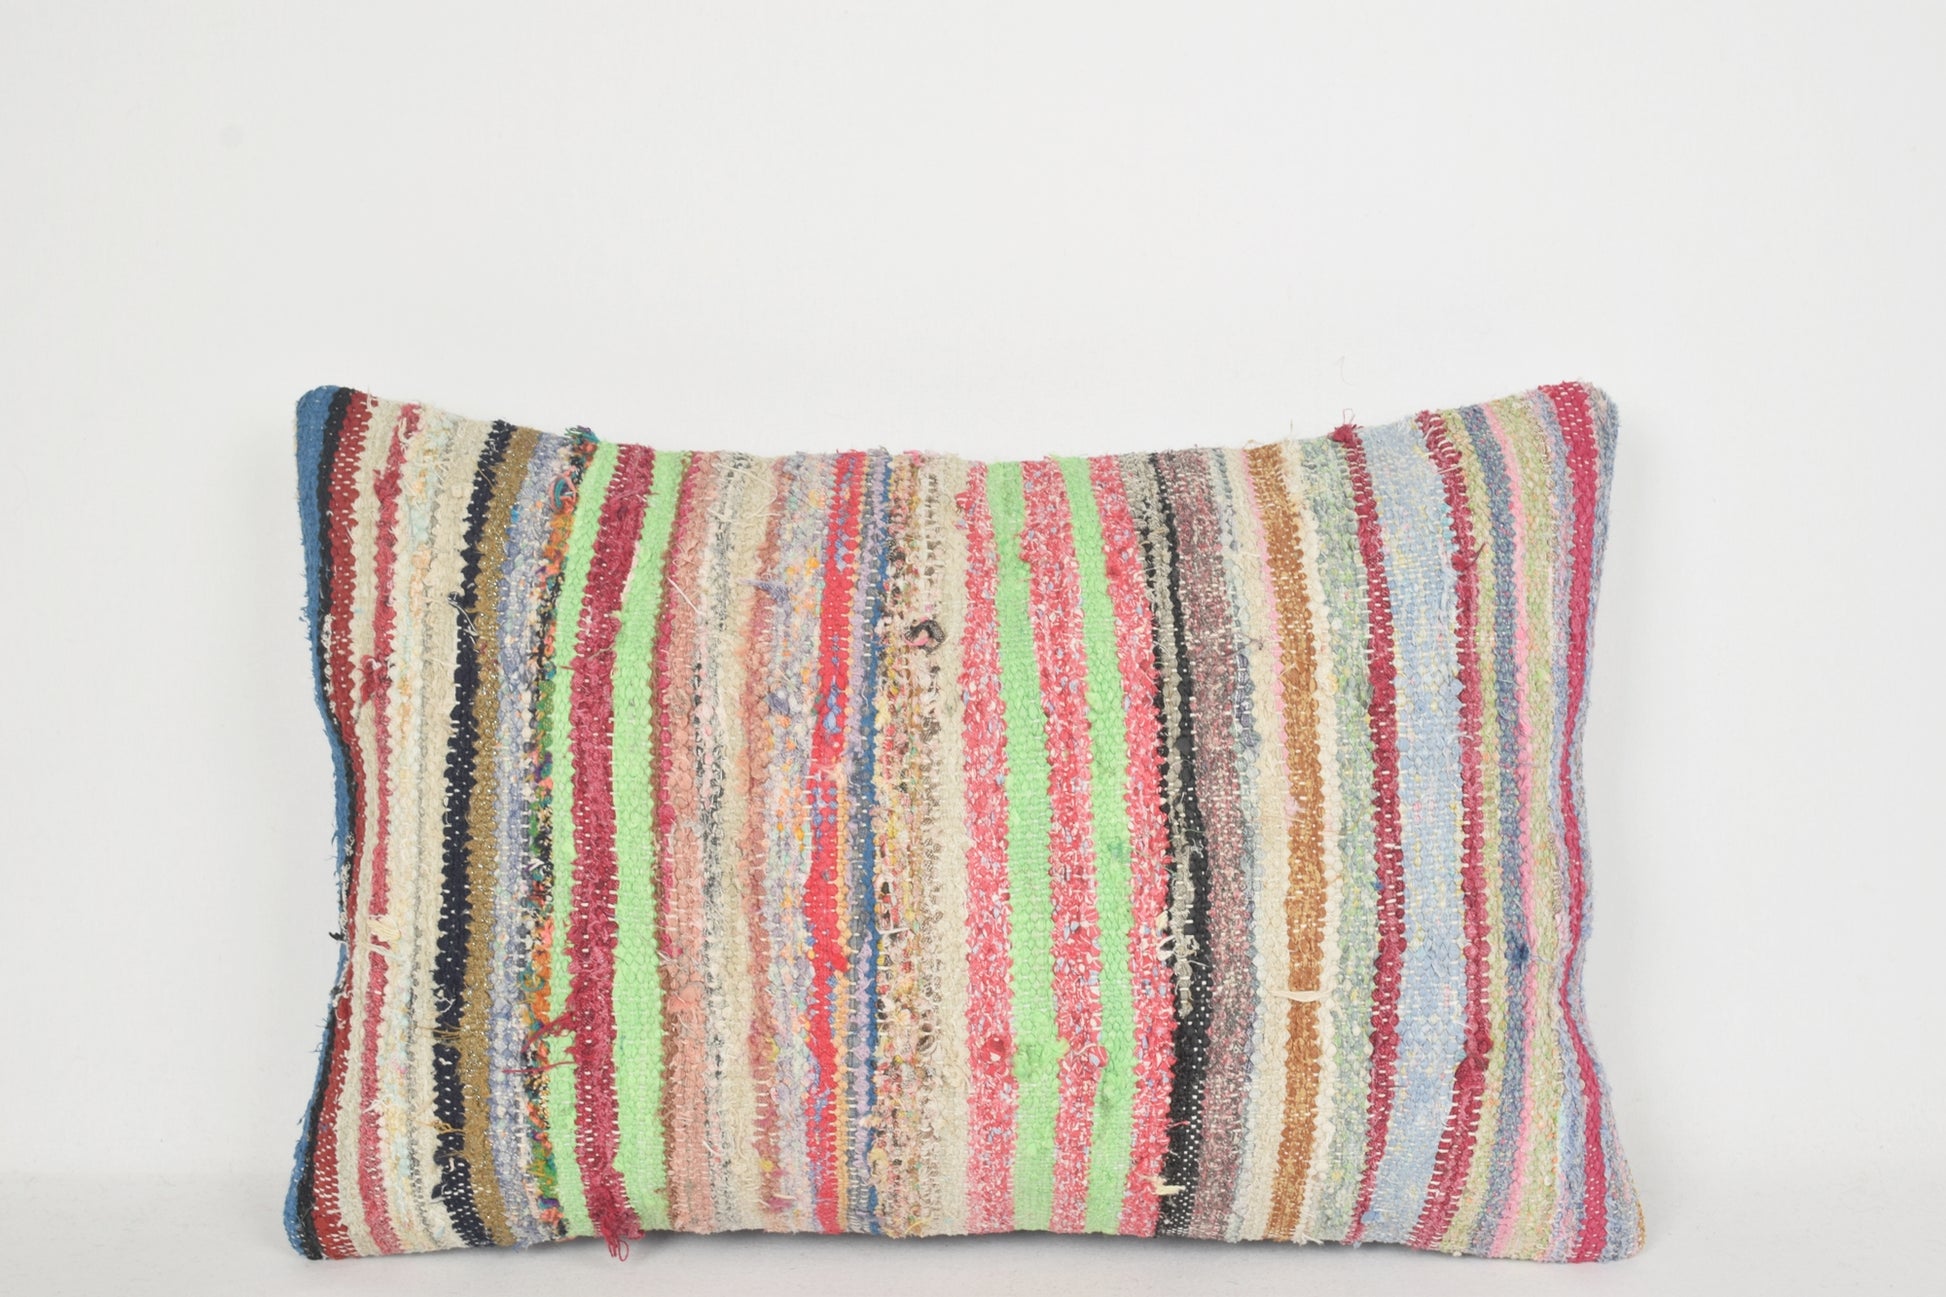 Kilim Woven Throw Pillow E00256 Lumbar Hand Crafted Private Decor